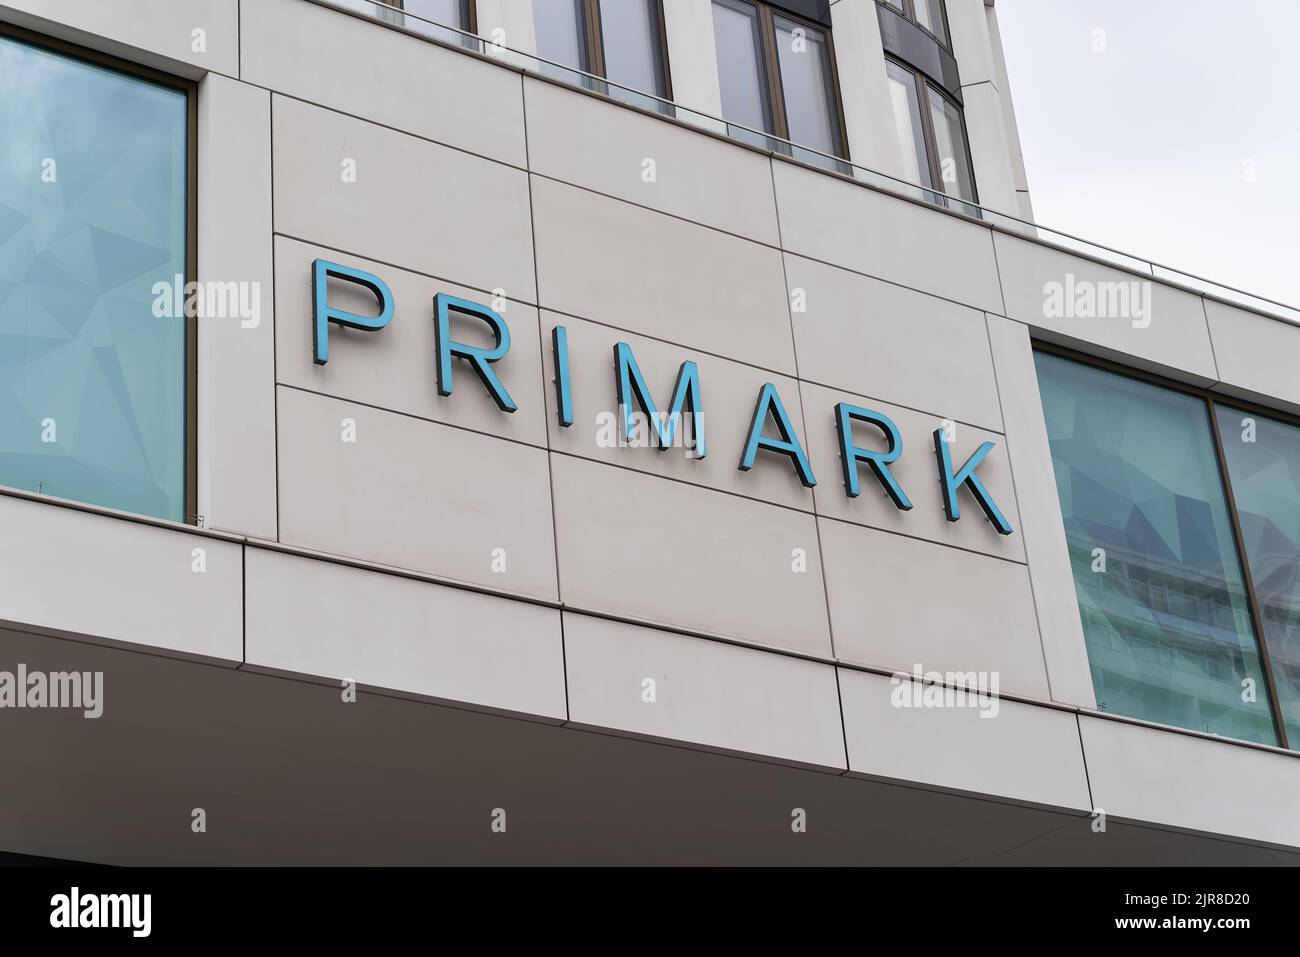 Store of the discounter Primark in the center of Berlin Stock Photo